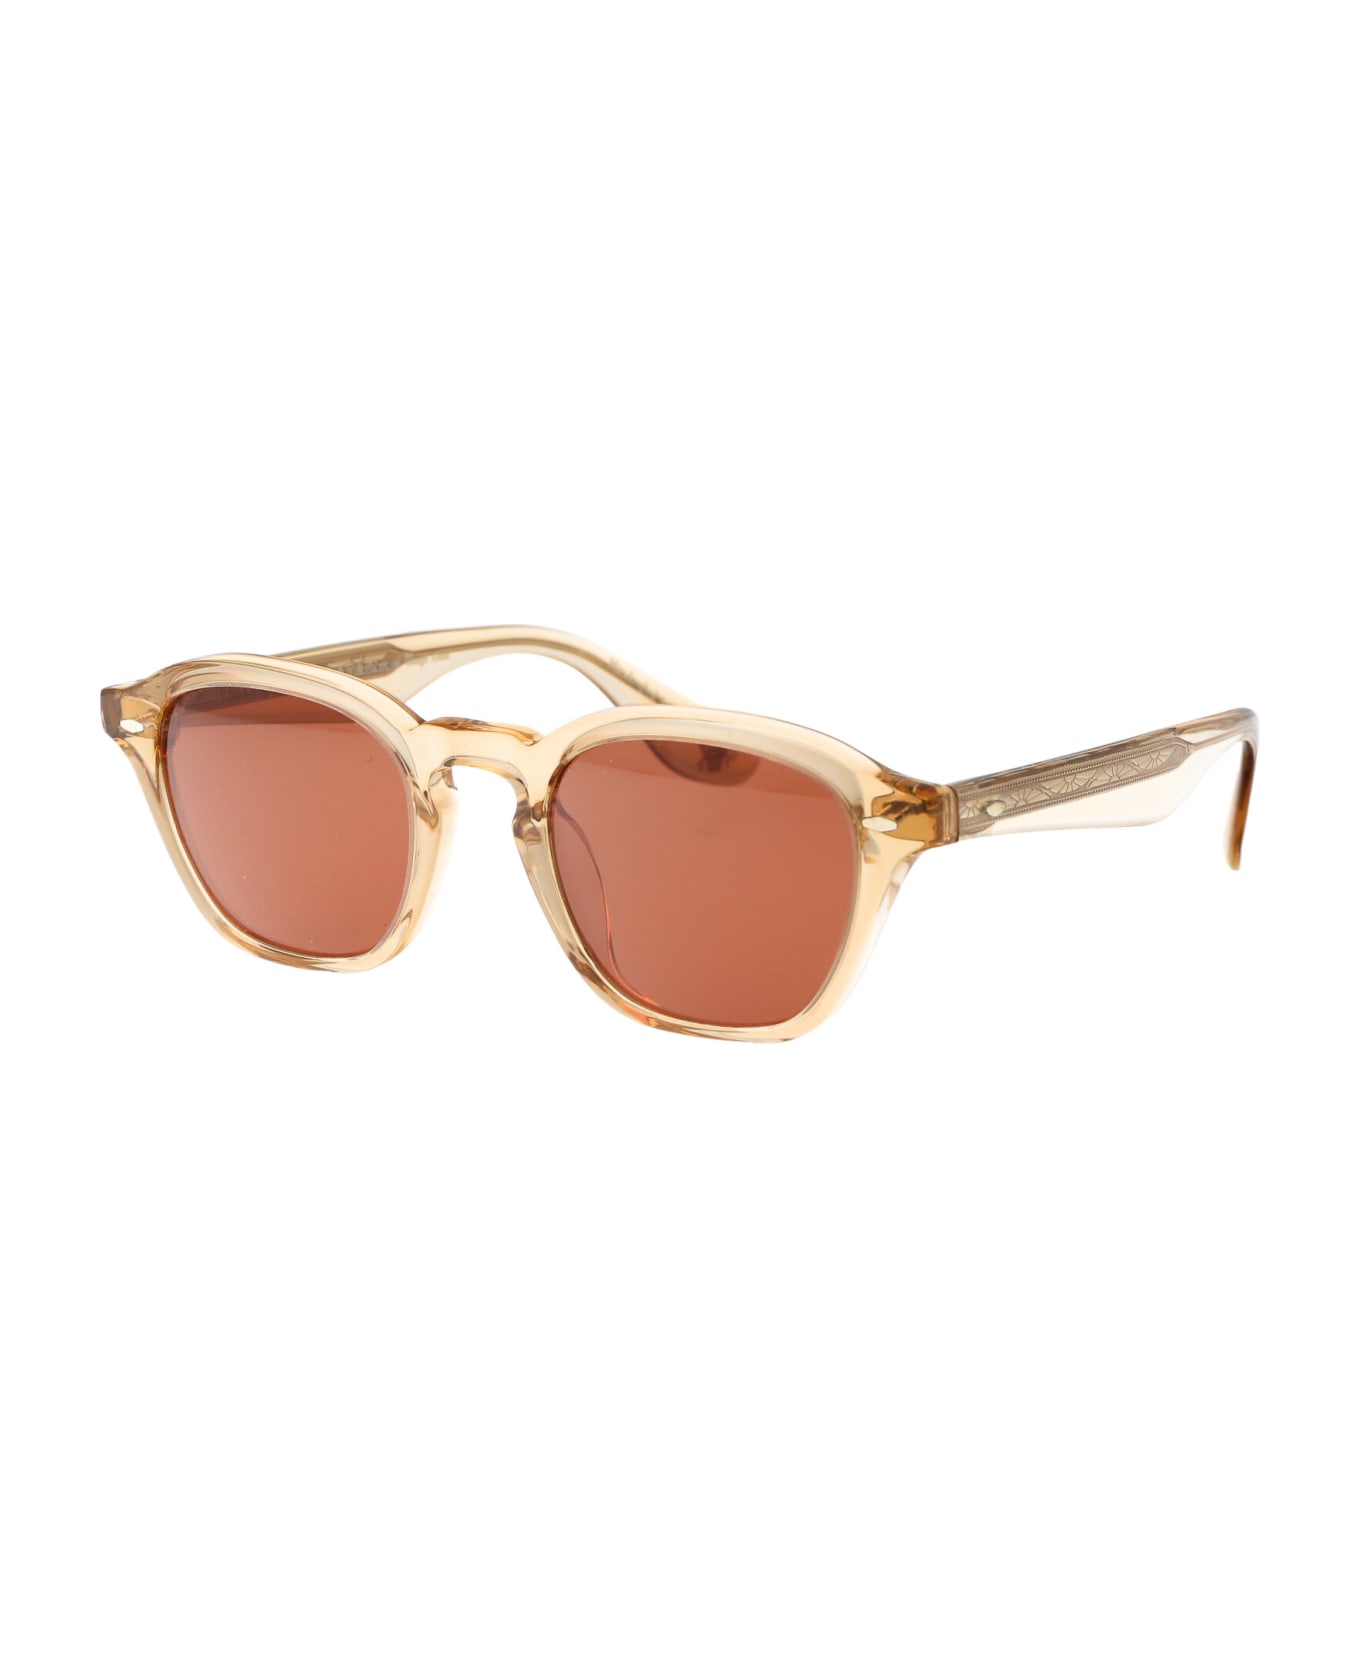 Oliver Peoples Peppe Sunglasses - 176653 Champagne サングラス